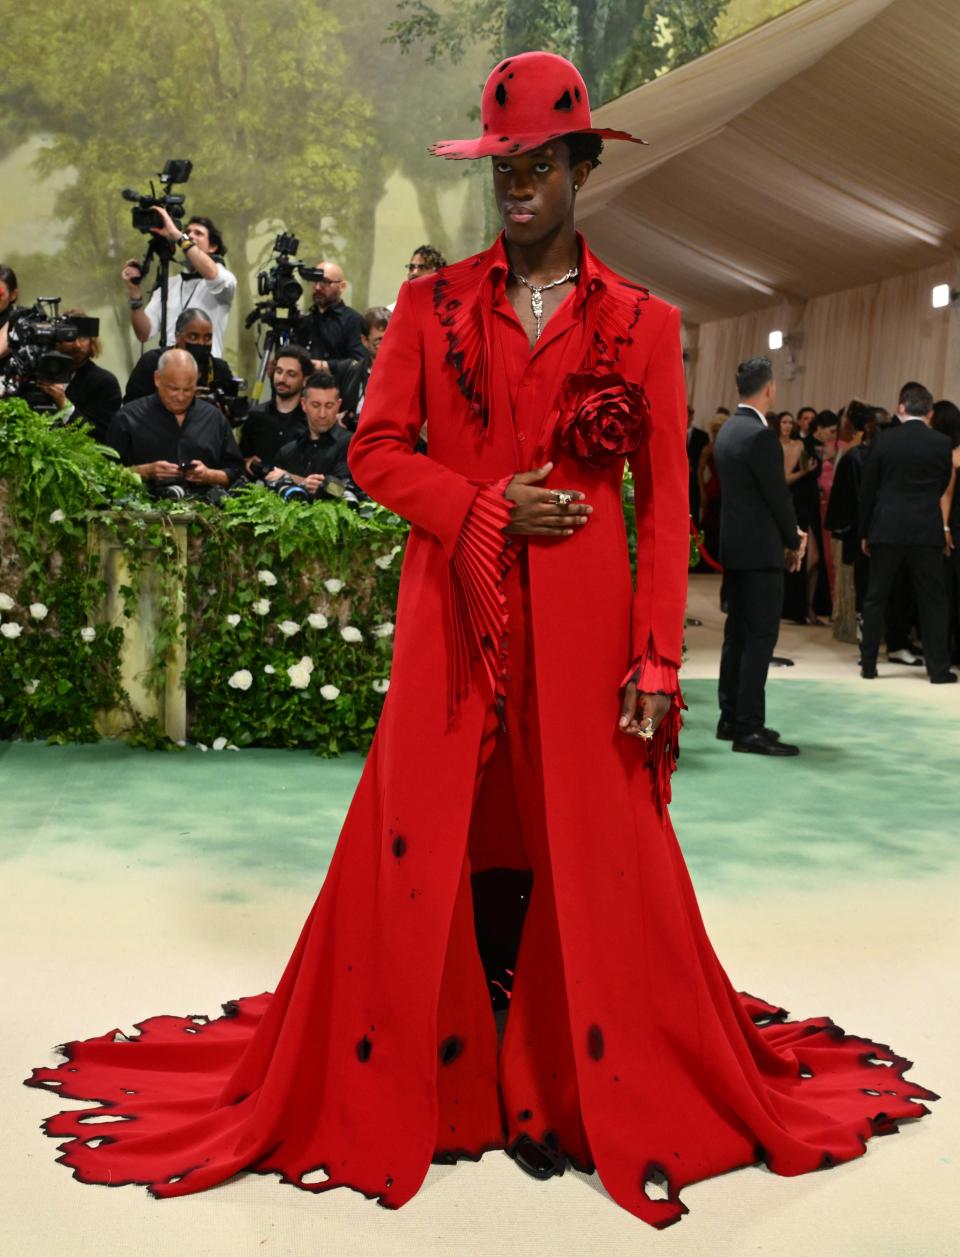 Person in a dramatic red outfit with hat and train, posing with a rose at an event. Photographers in background